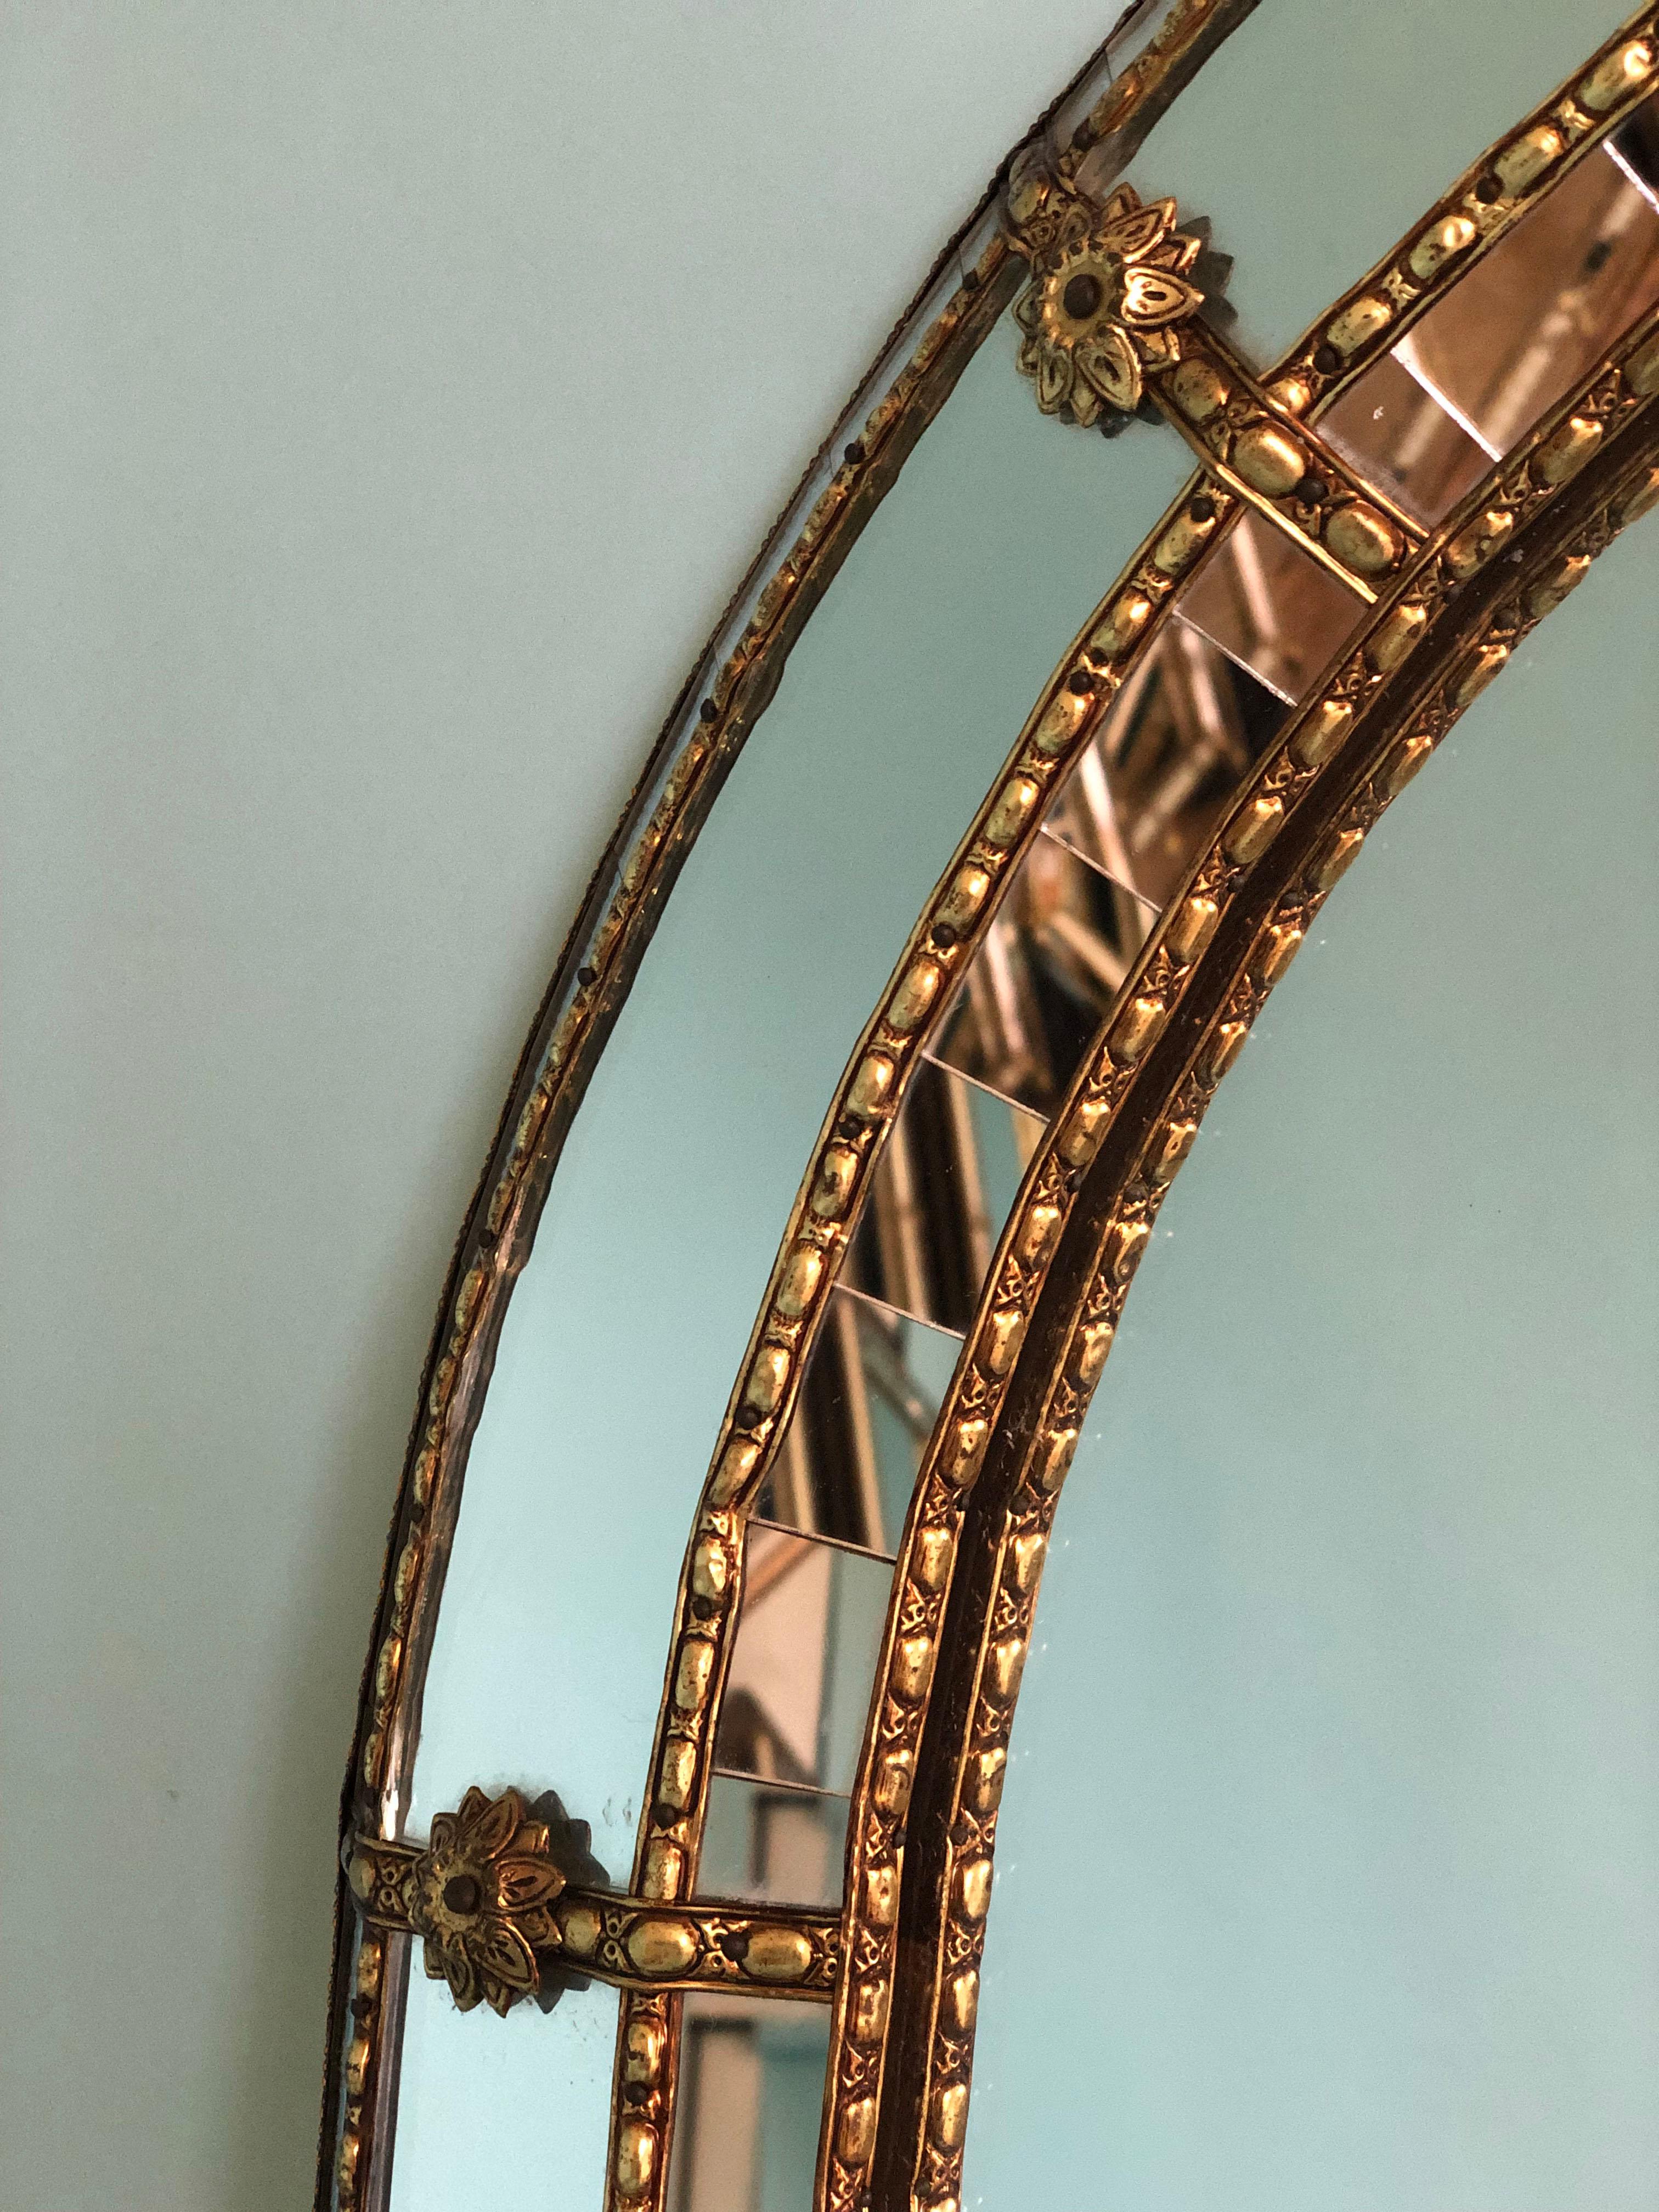 Beautiful Spanish large mirror with a Venetian glass frame with a brass golden strip. The frame is made with small crystals both on the outside and inside, and larger ones in the center line. The brass strip holds the mirrors together.

Handmade